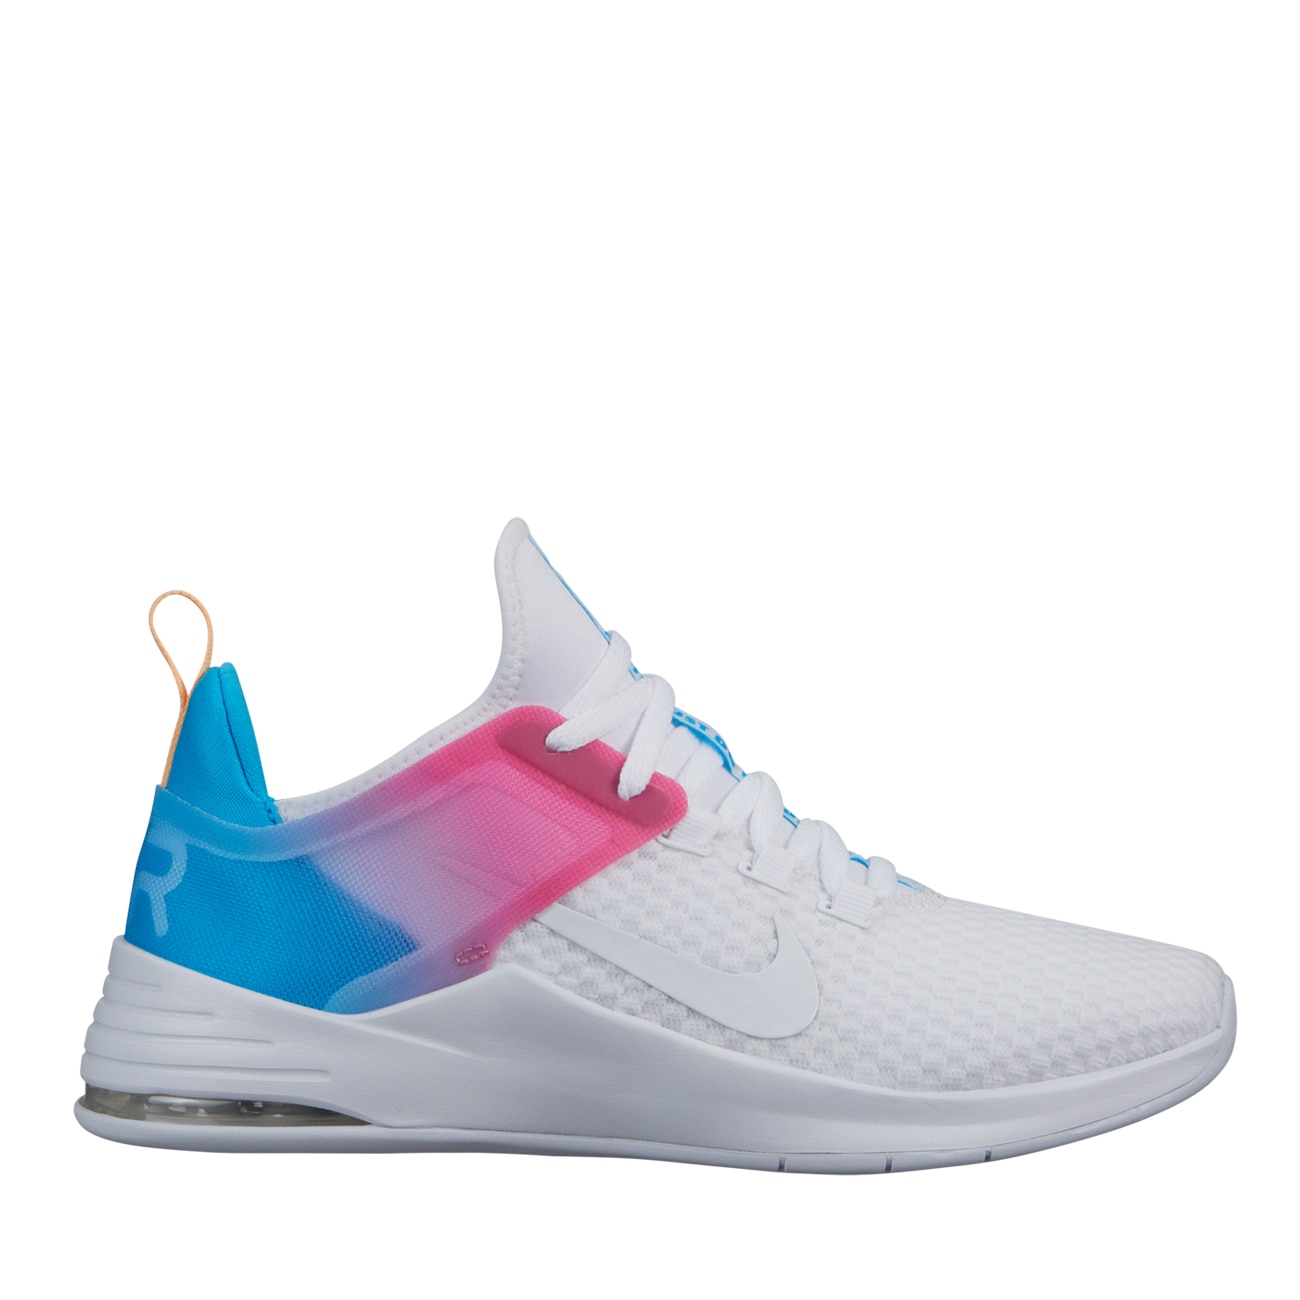 Nike Online Only Air Max Bella TR 2 